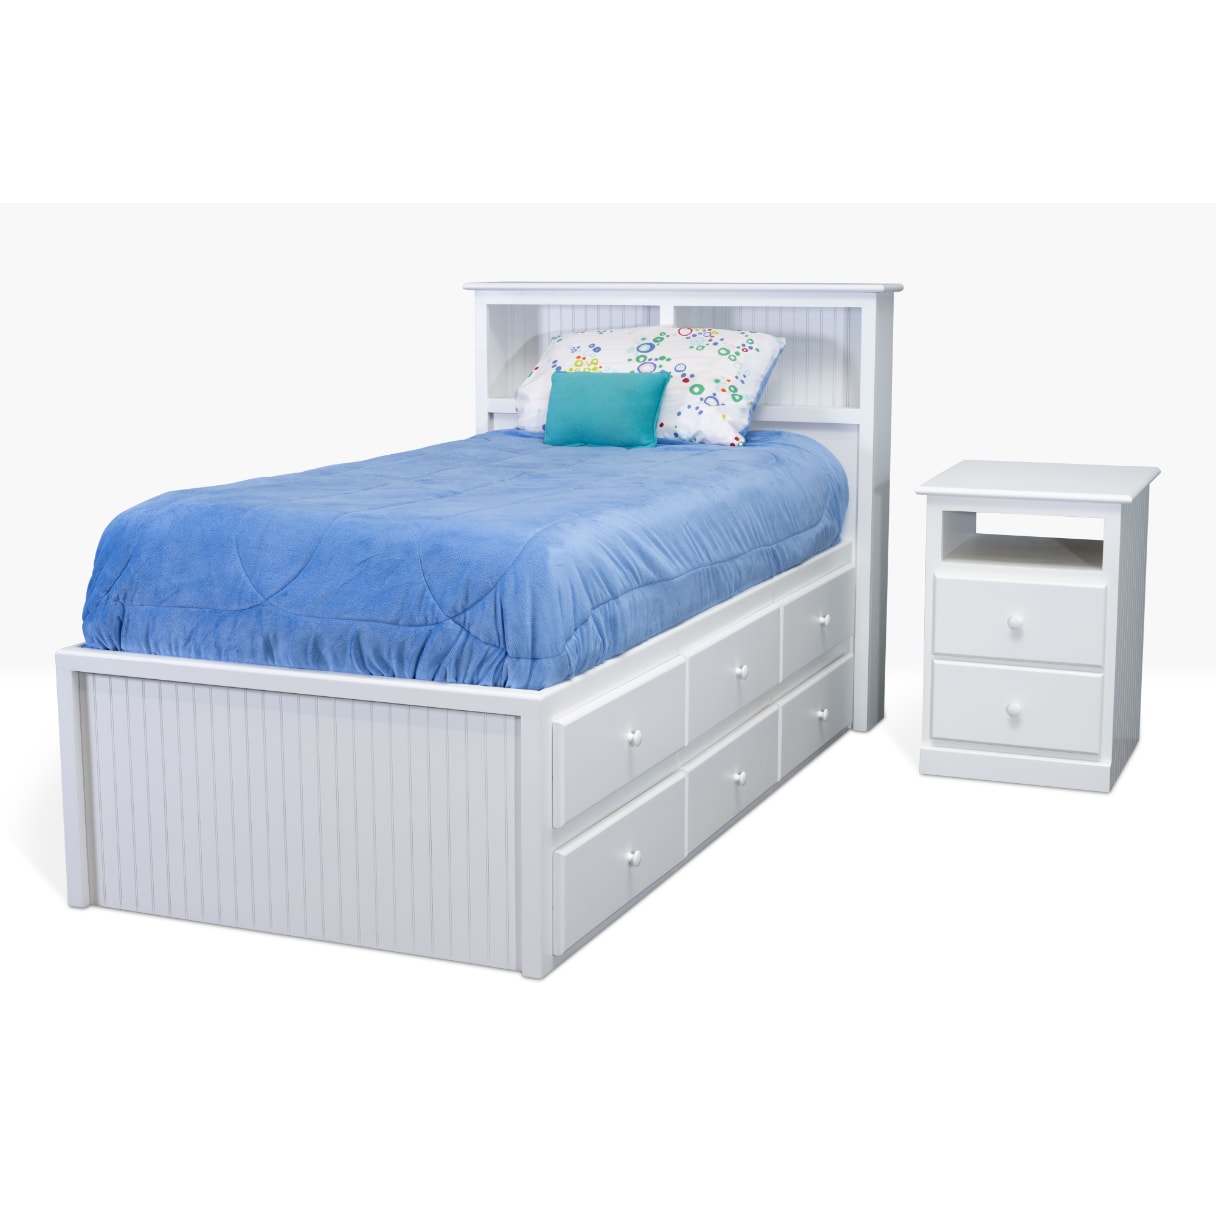 Acadia Cottage Storage Bed with 6 drawers on each side and a book case headboard for storage.  Pictured in white with a two drawer nightstand.